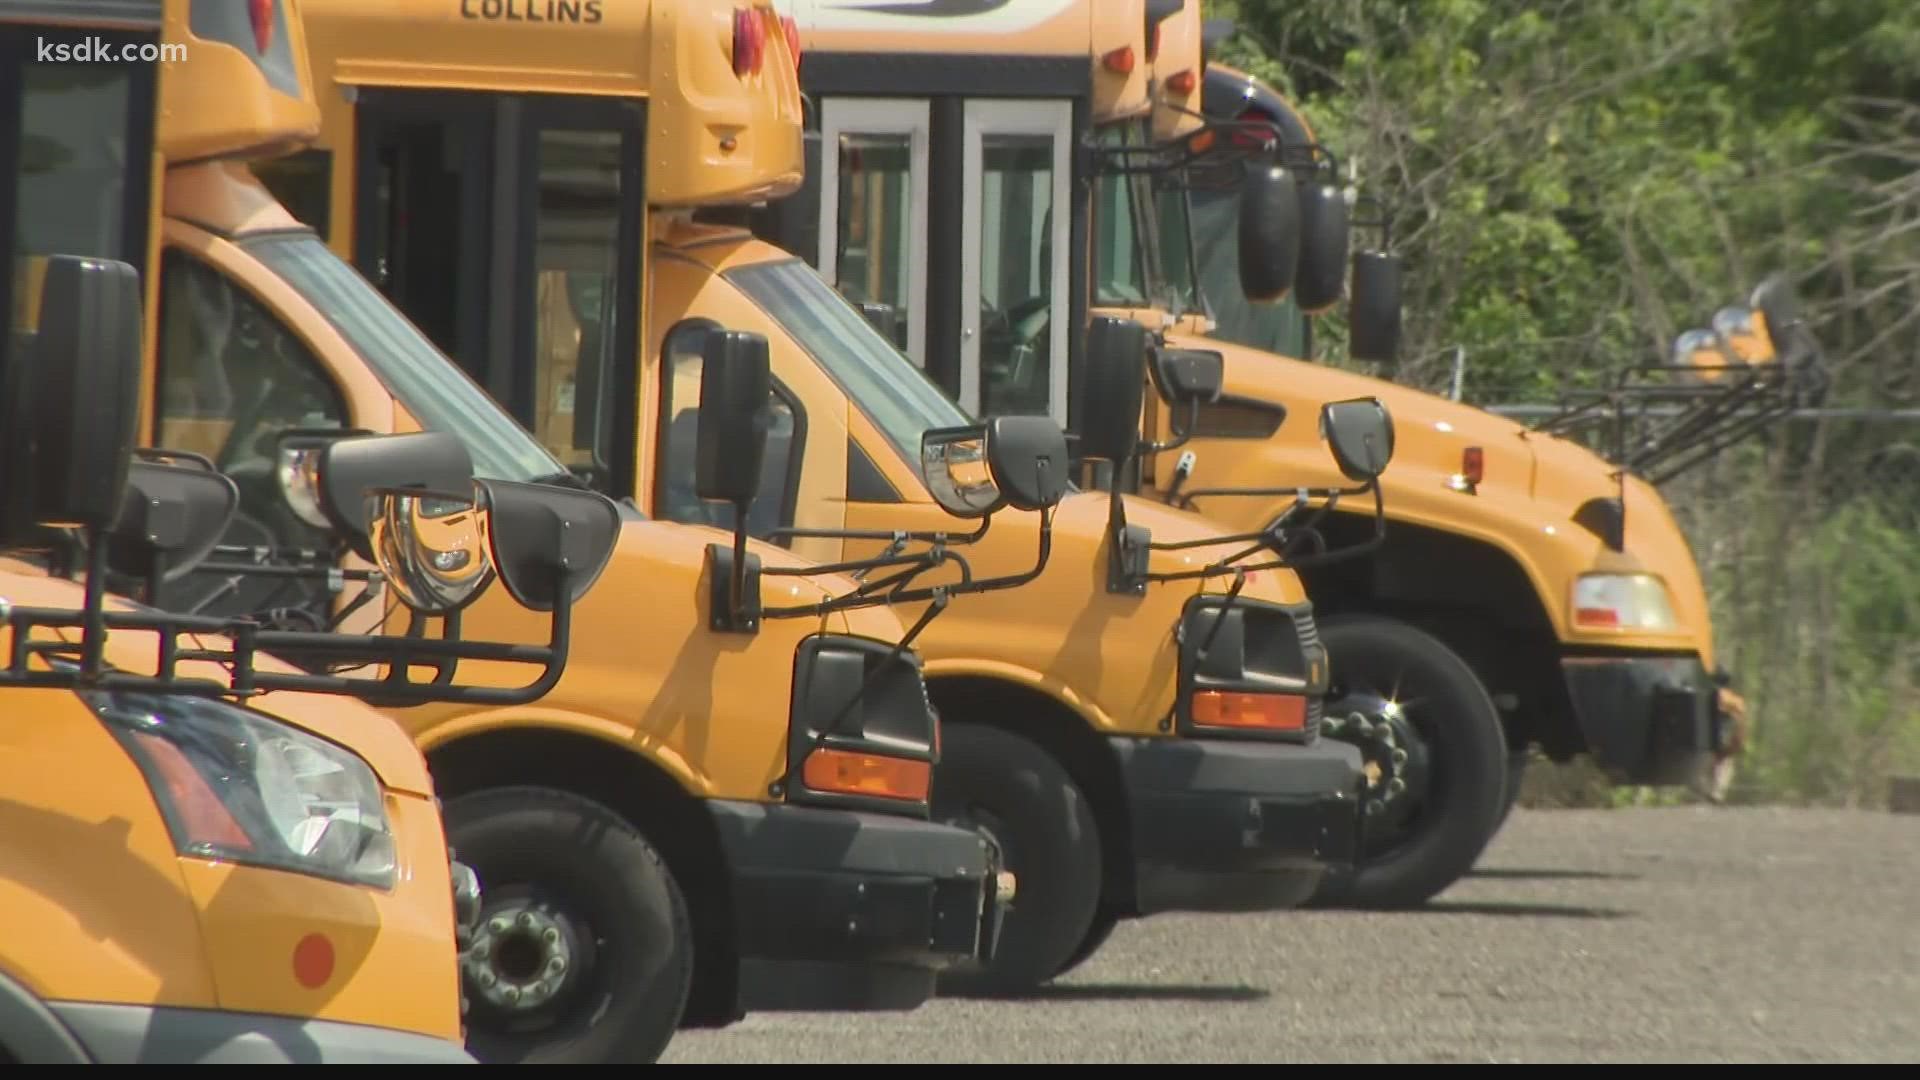 Madison County Transit has offered free bus rides to affected students